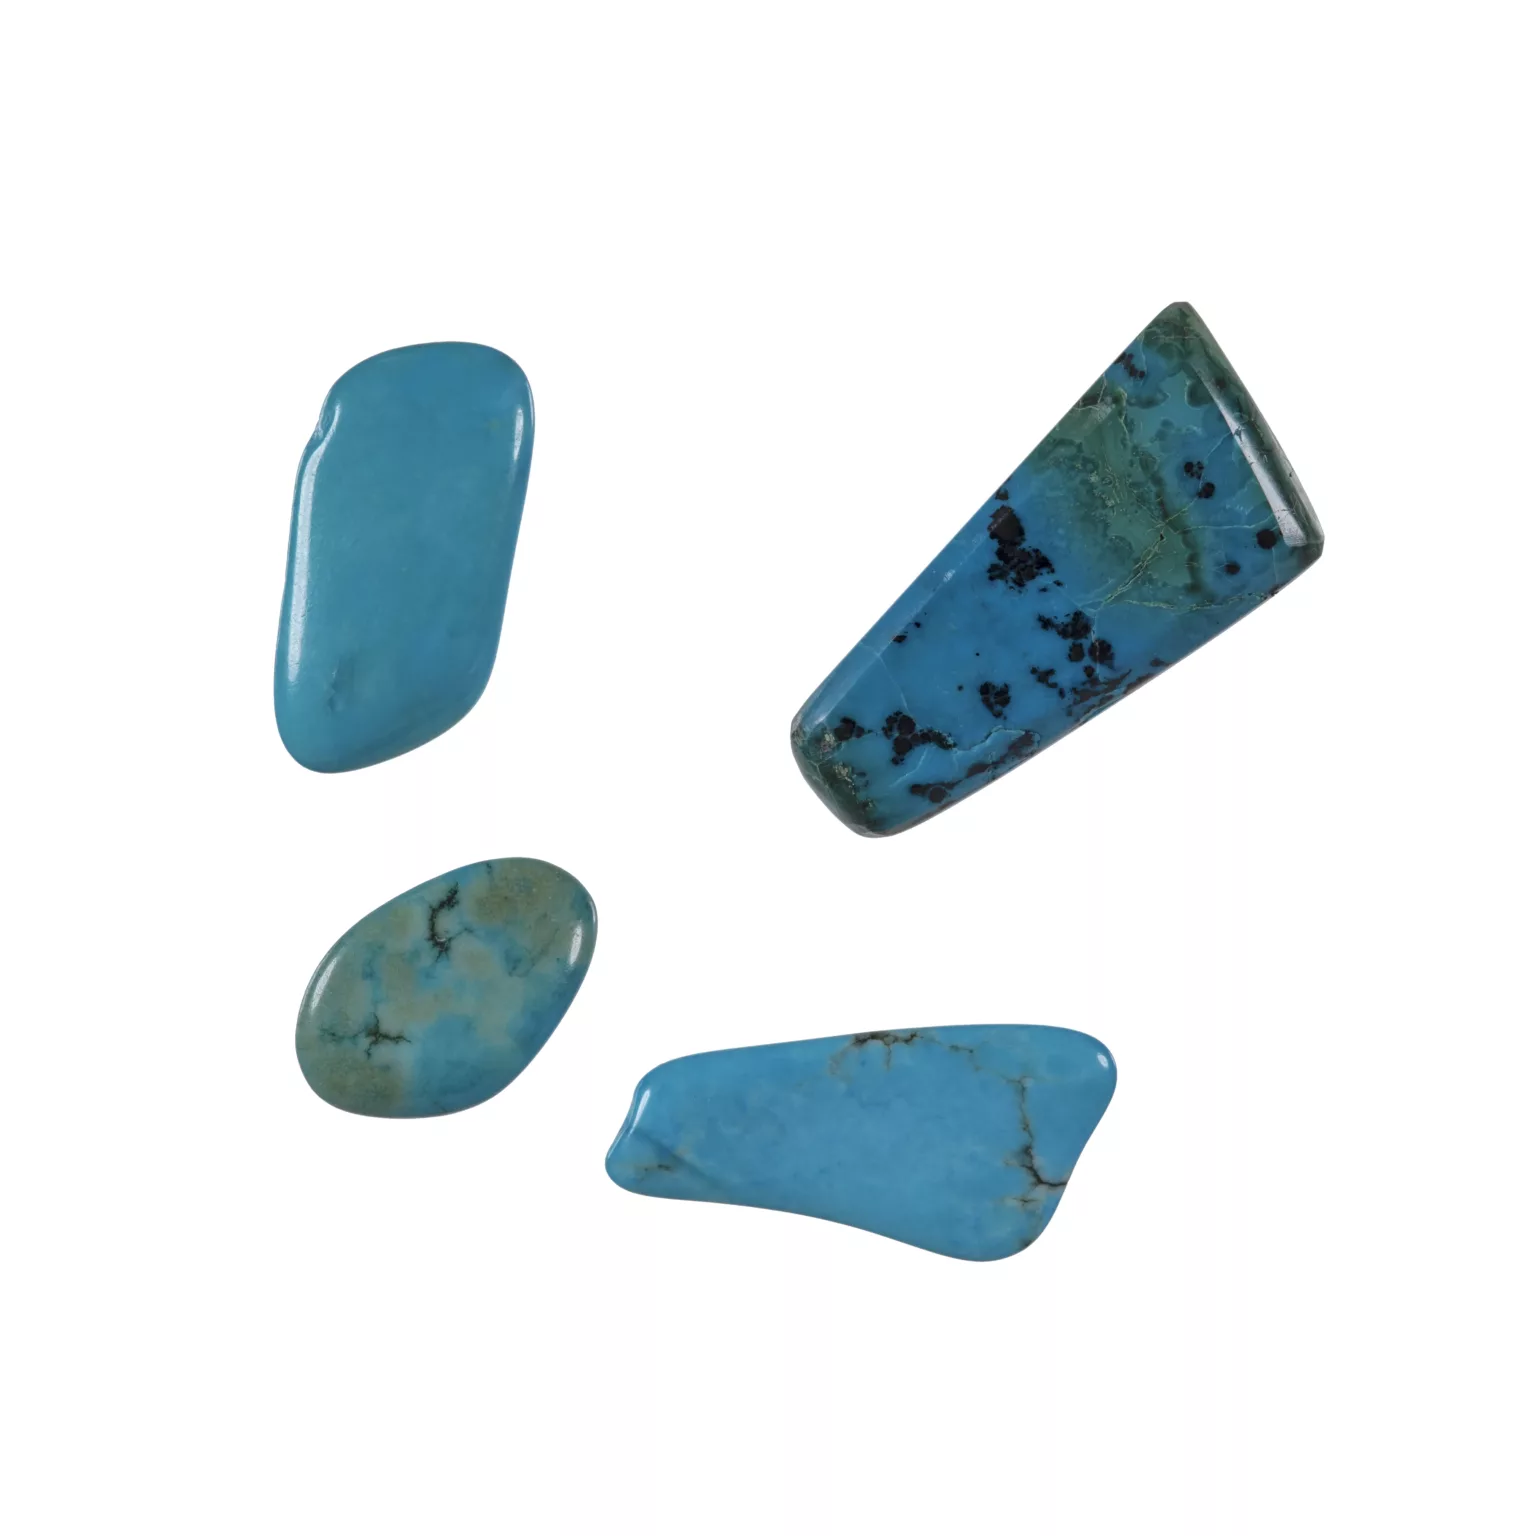 Group of Four Turquoise Gemstones